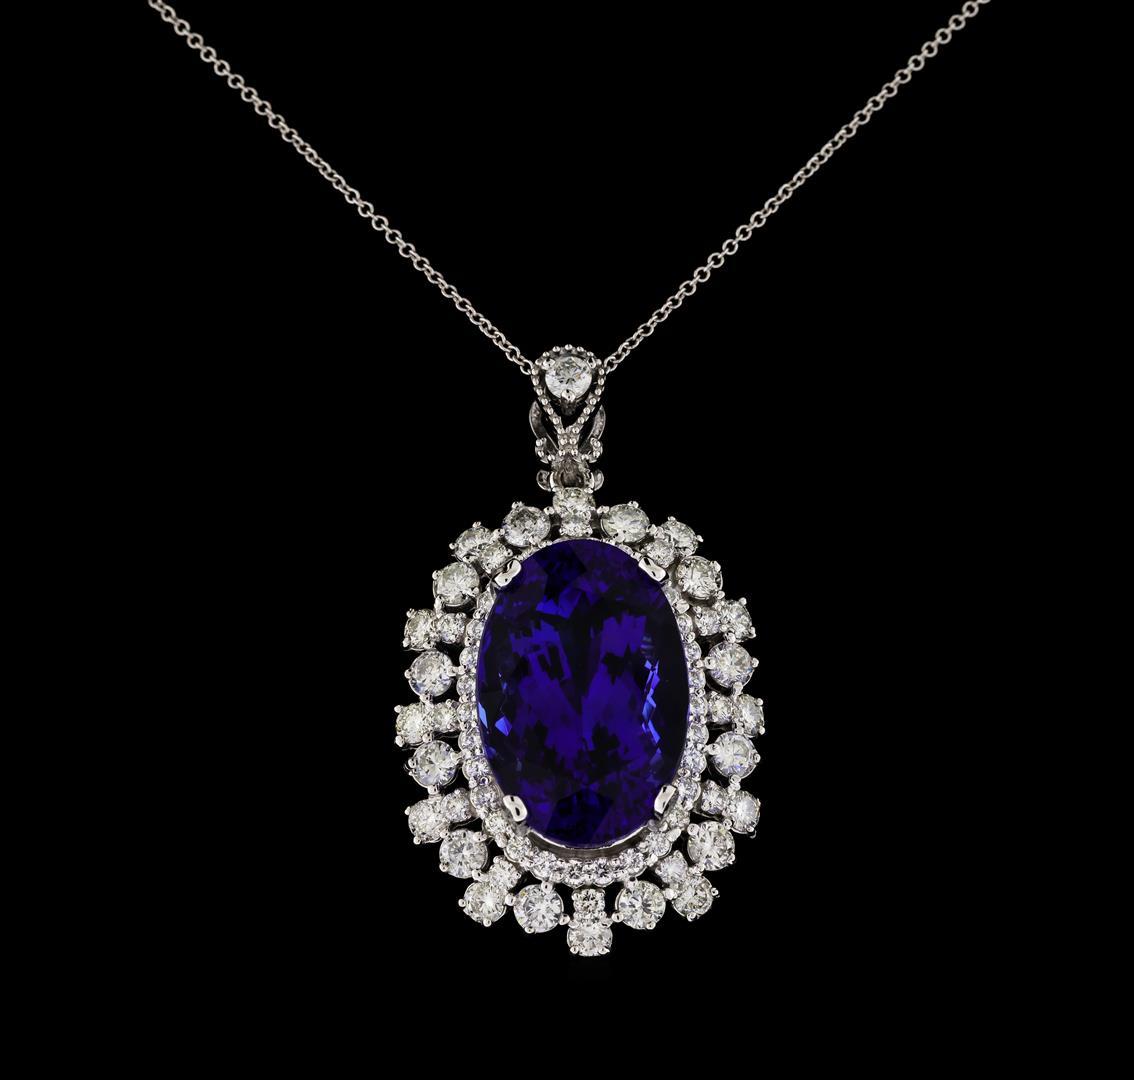 20.96 ctw Tanzanite and Diamond Pendant With Chain - 14KT White Gold